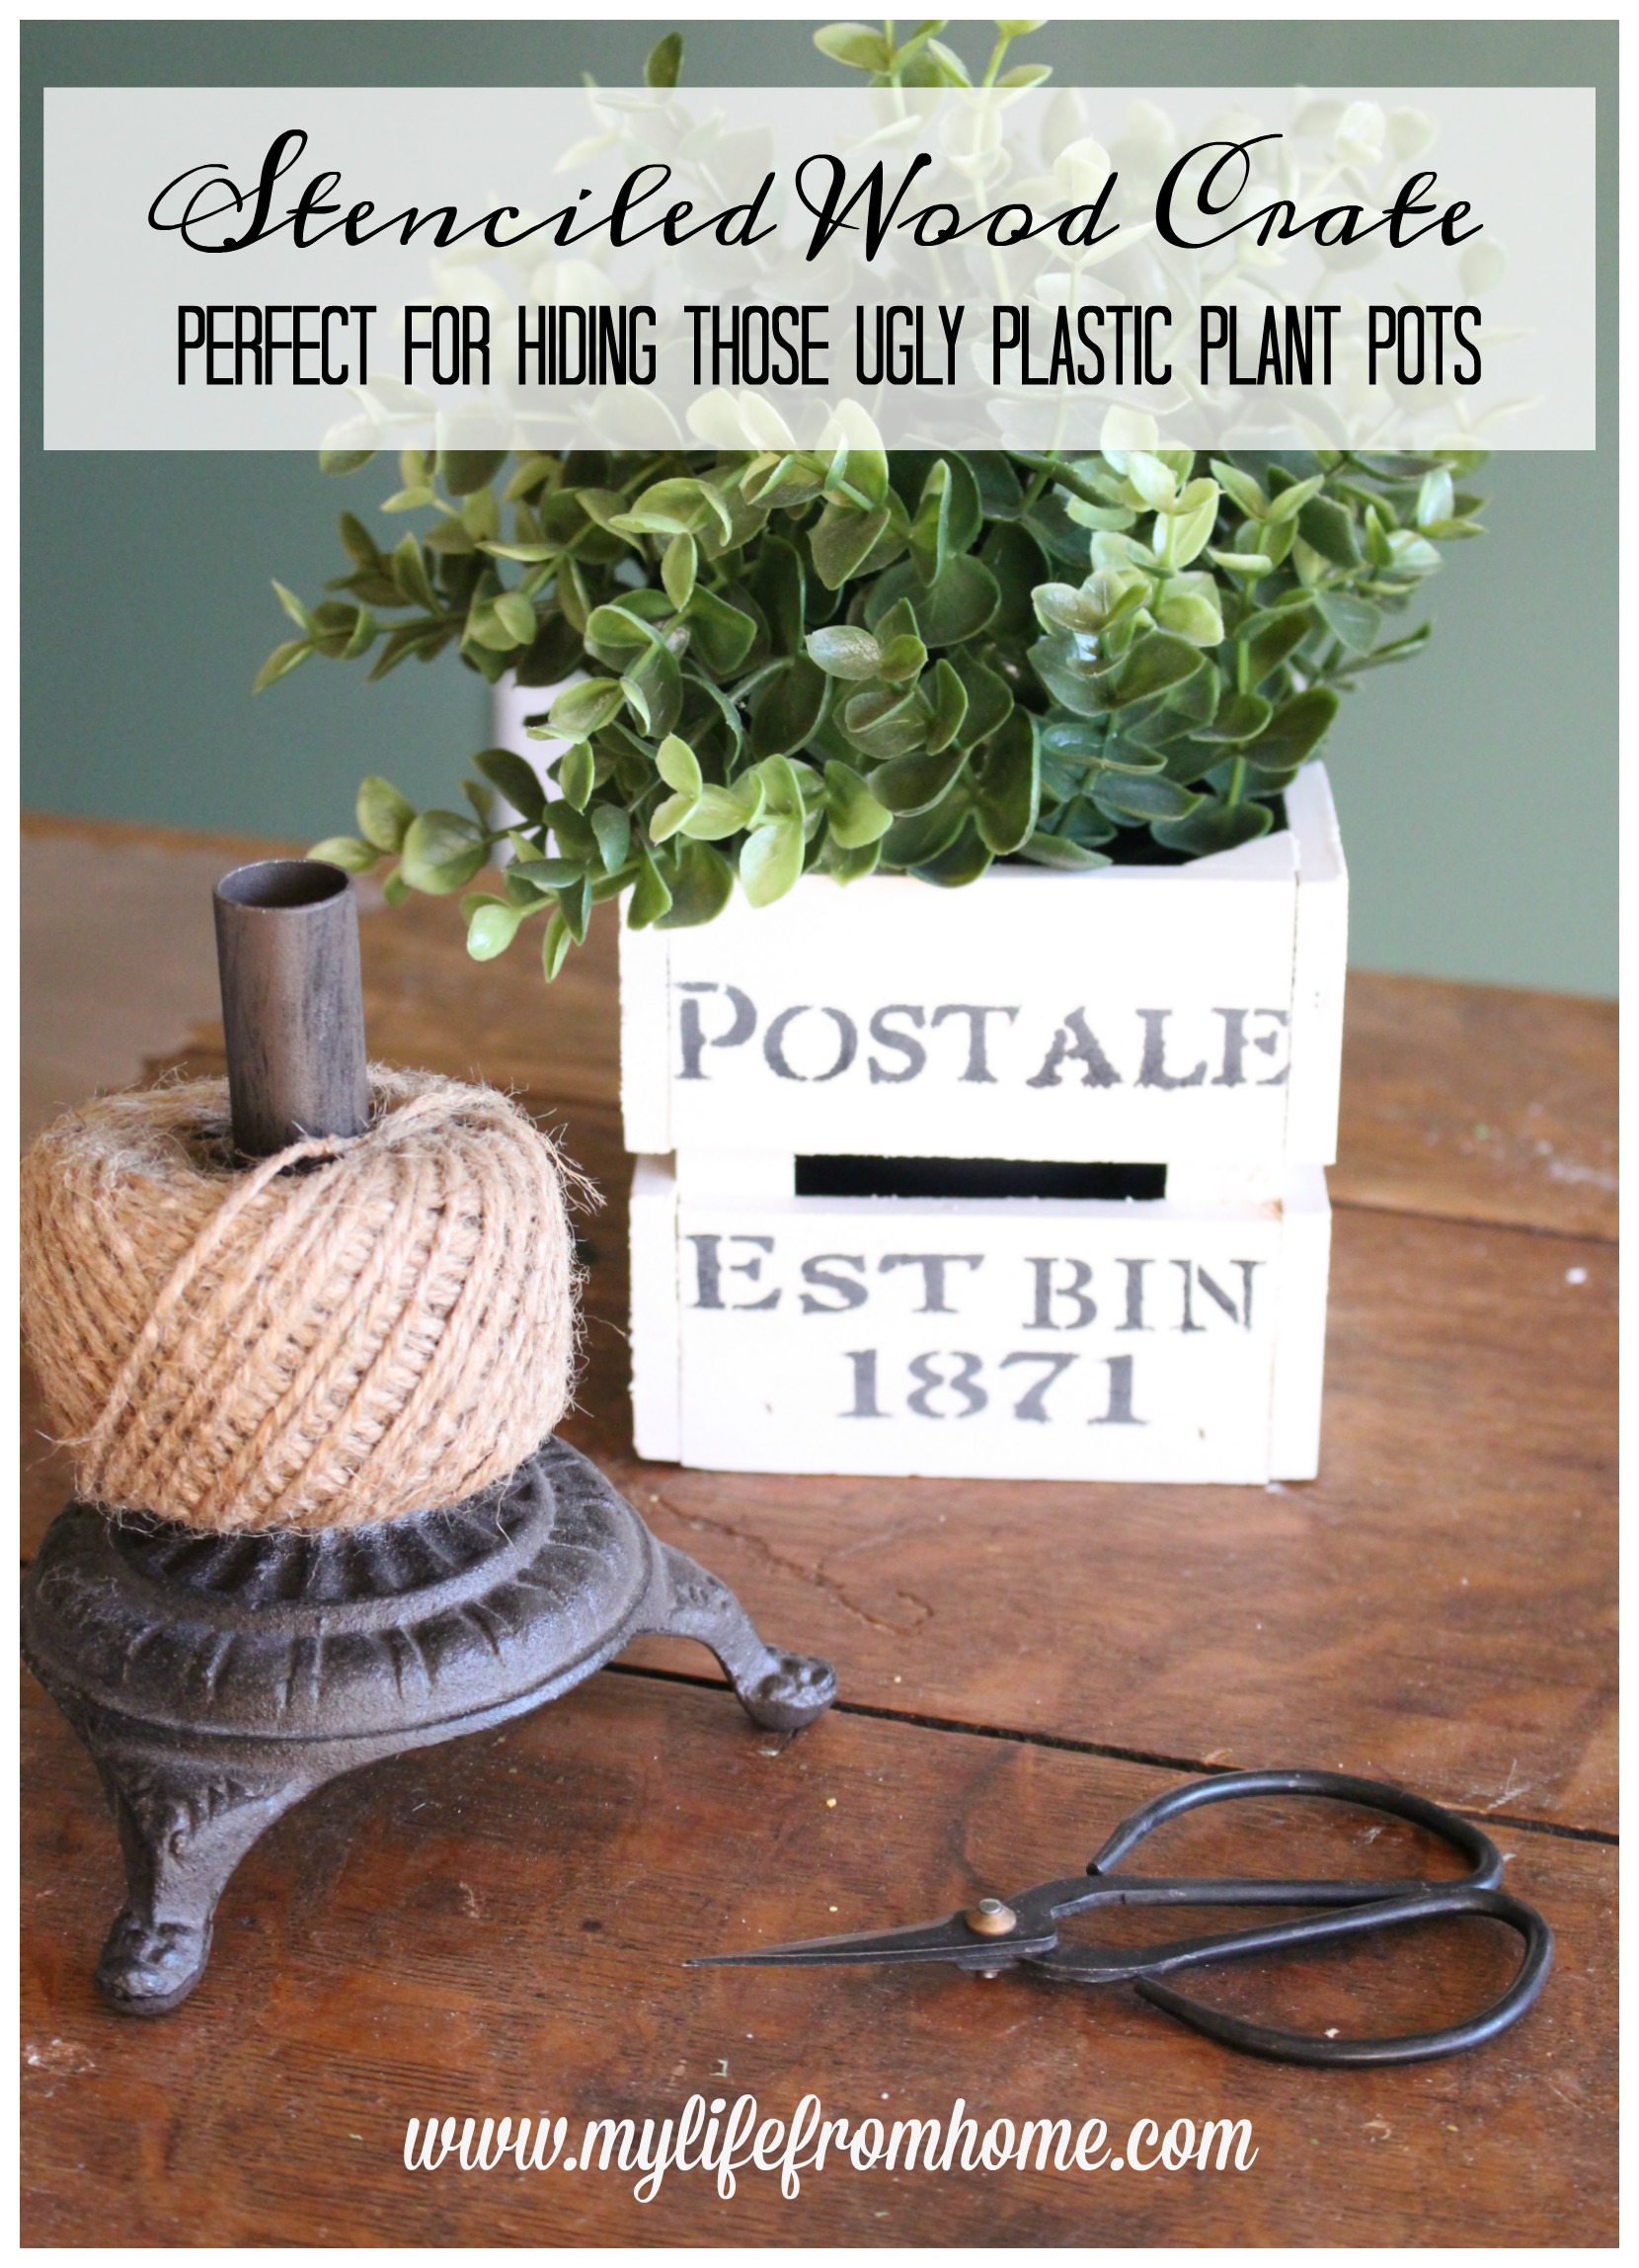 Stenciled Wood Crate- small crate- stencil on wood- vintage stencil- hiding ugly plastic plant pots- faux plant holder- plant pot